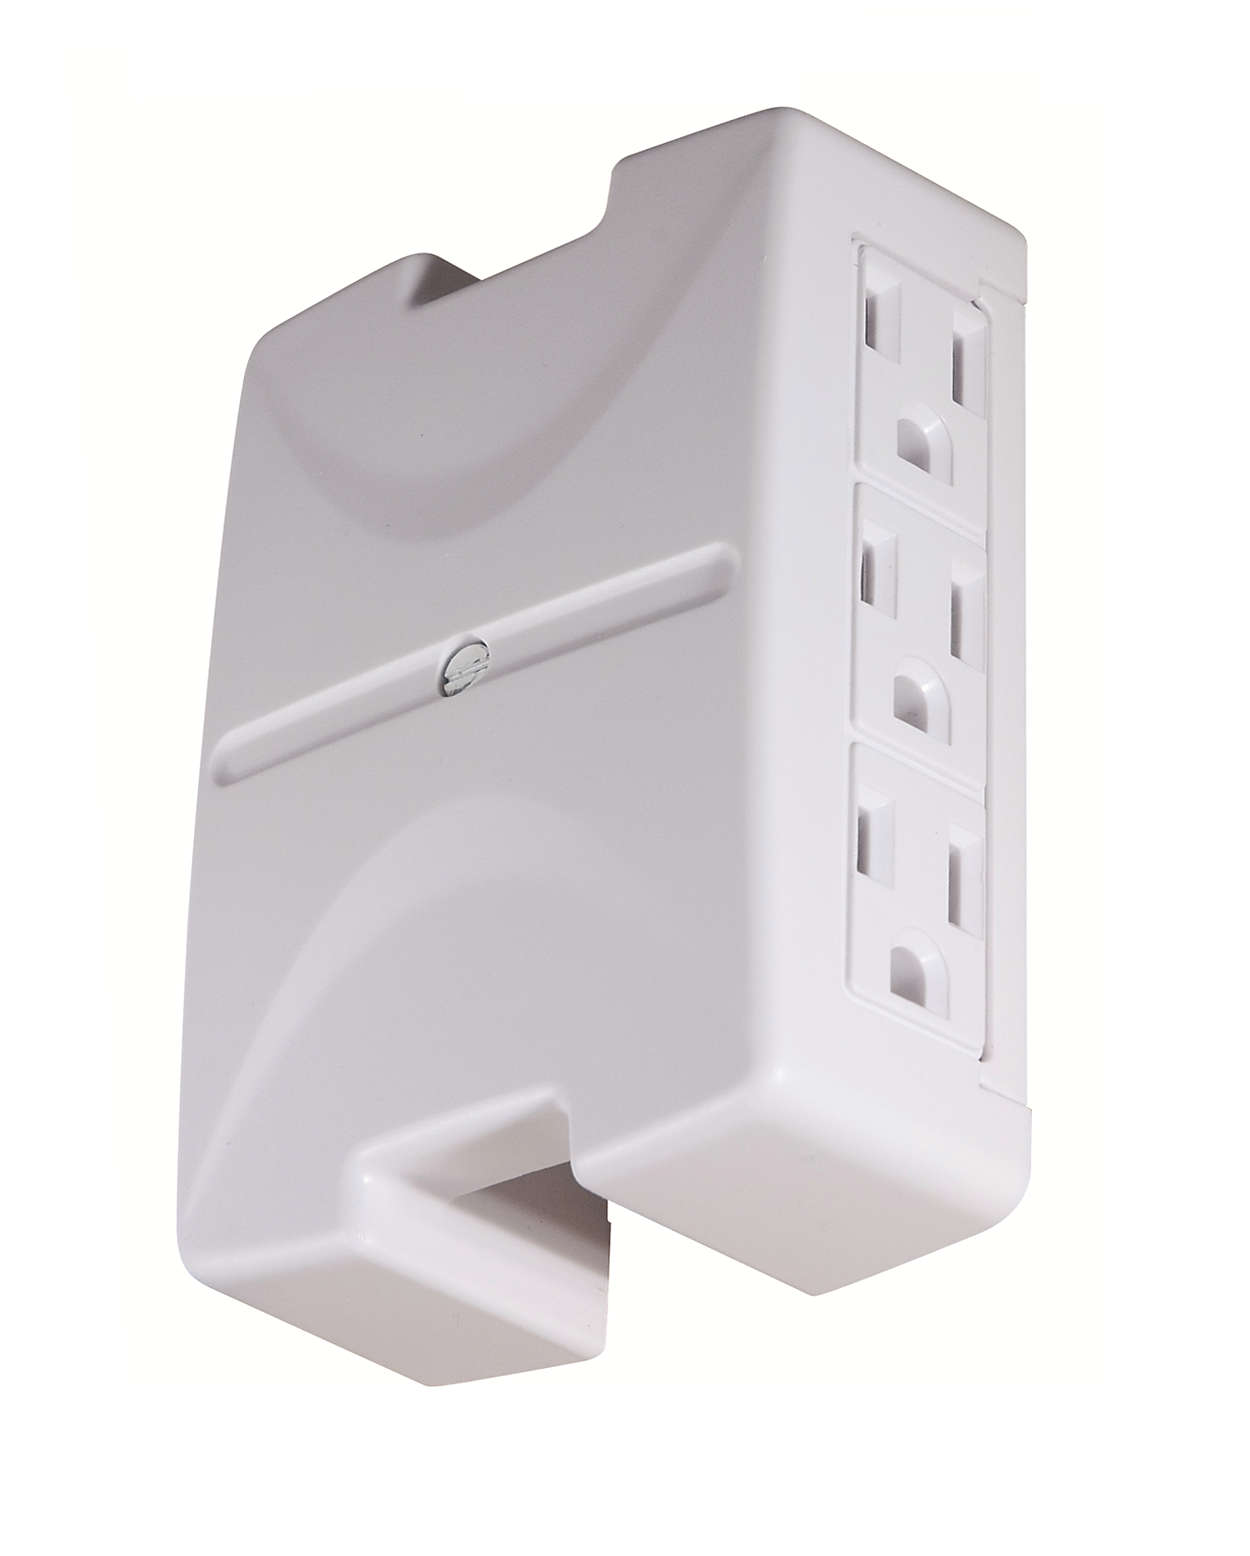 Expand your outlet space